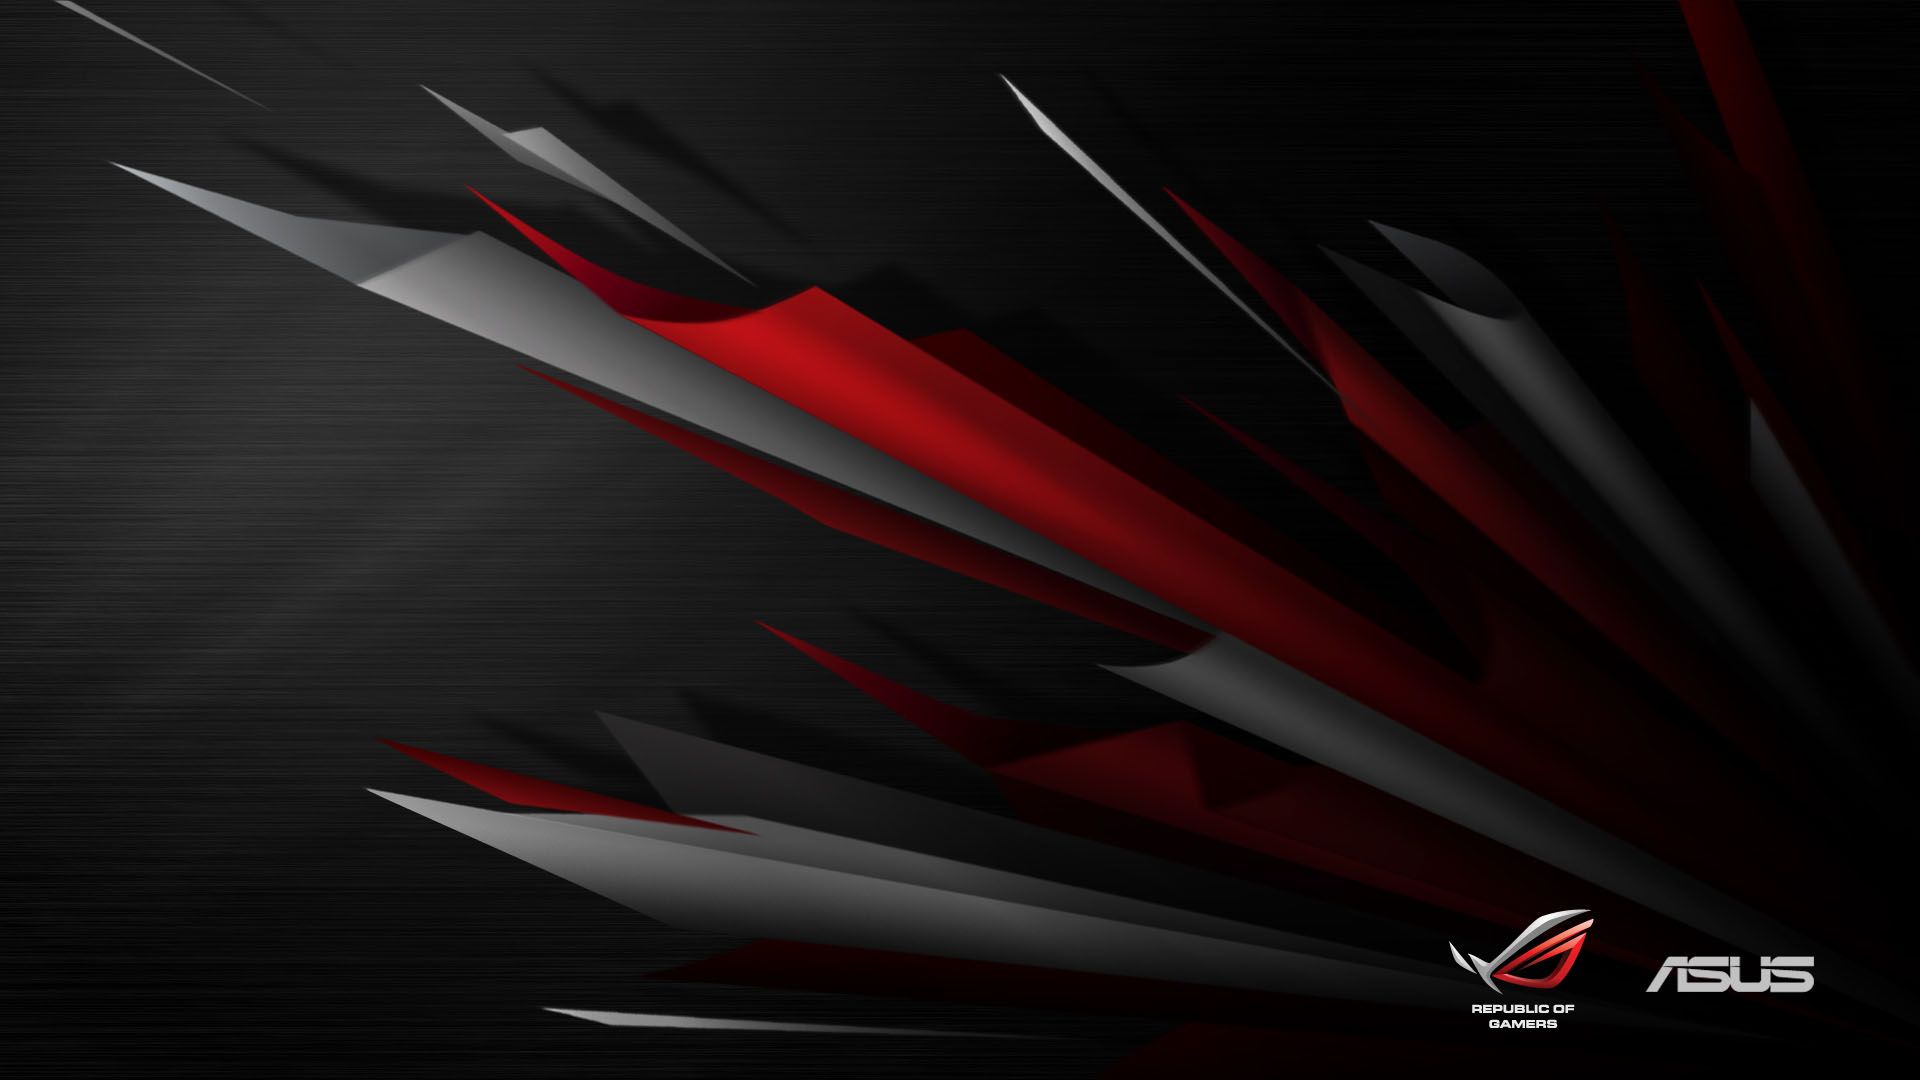 Best 38+ Asus ROG Backgrounds on HipWallpapers